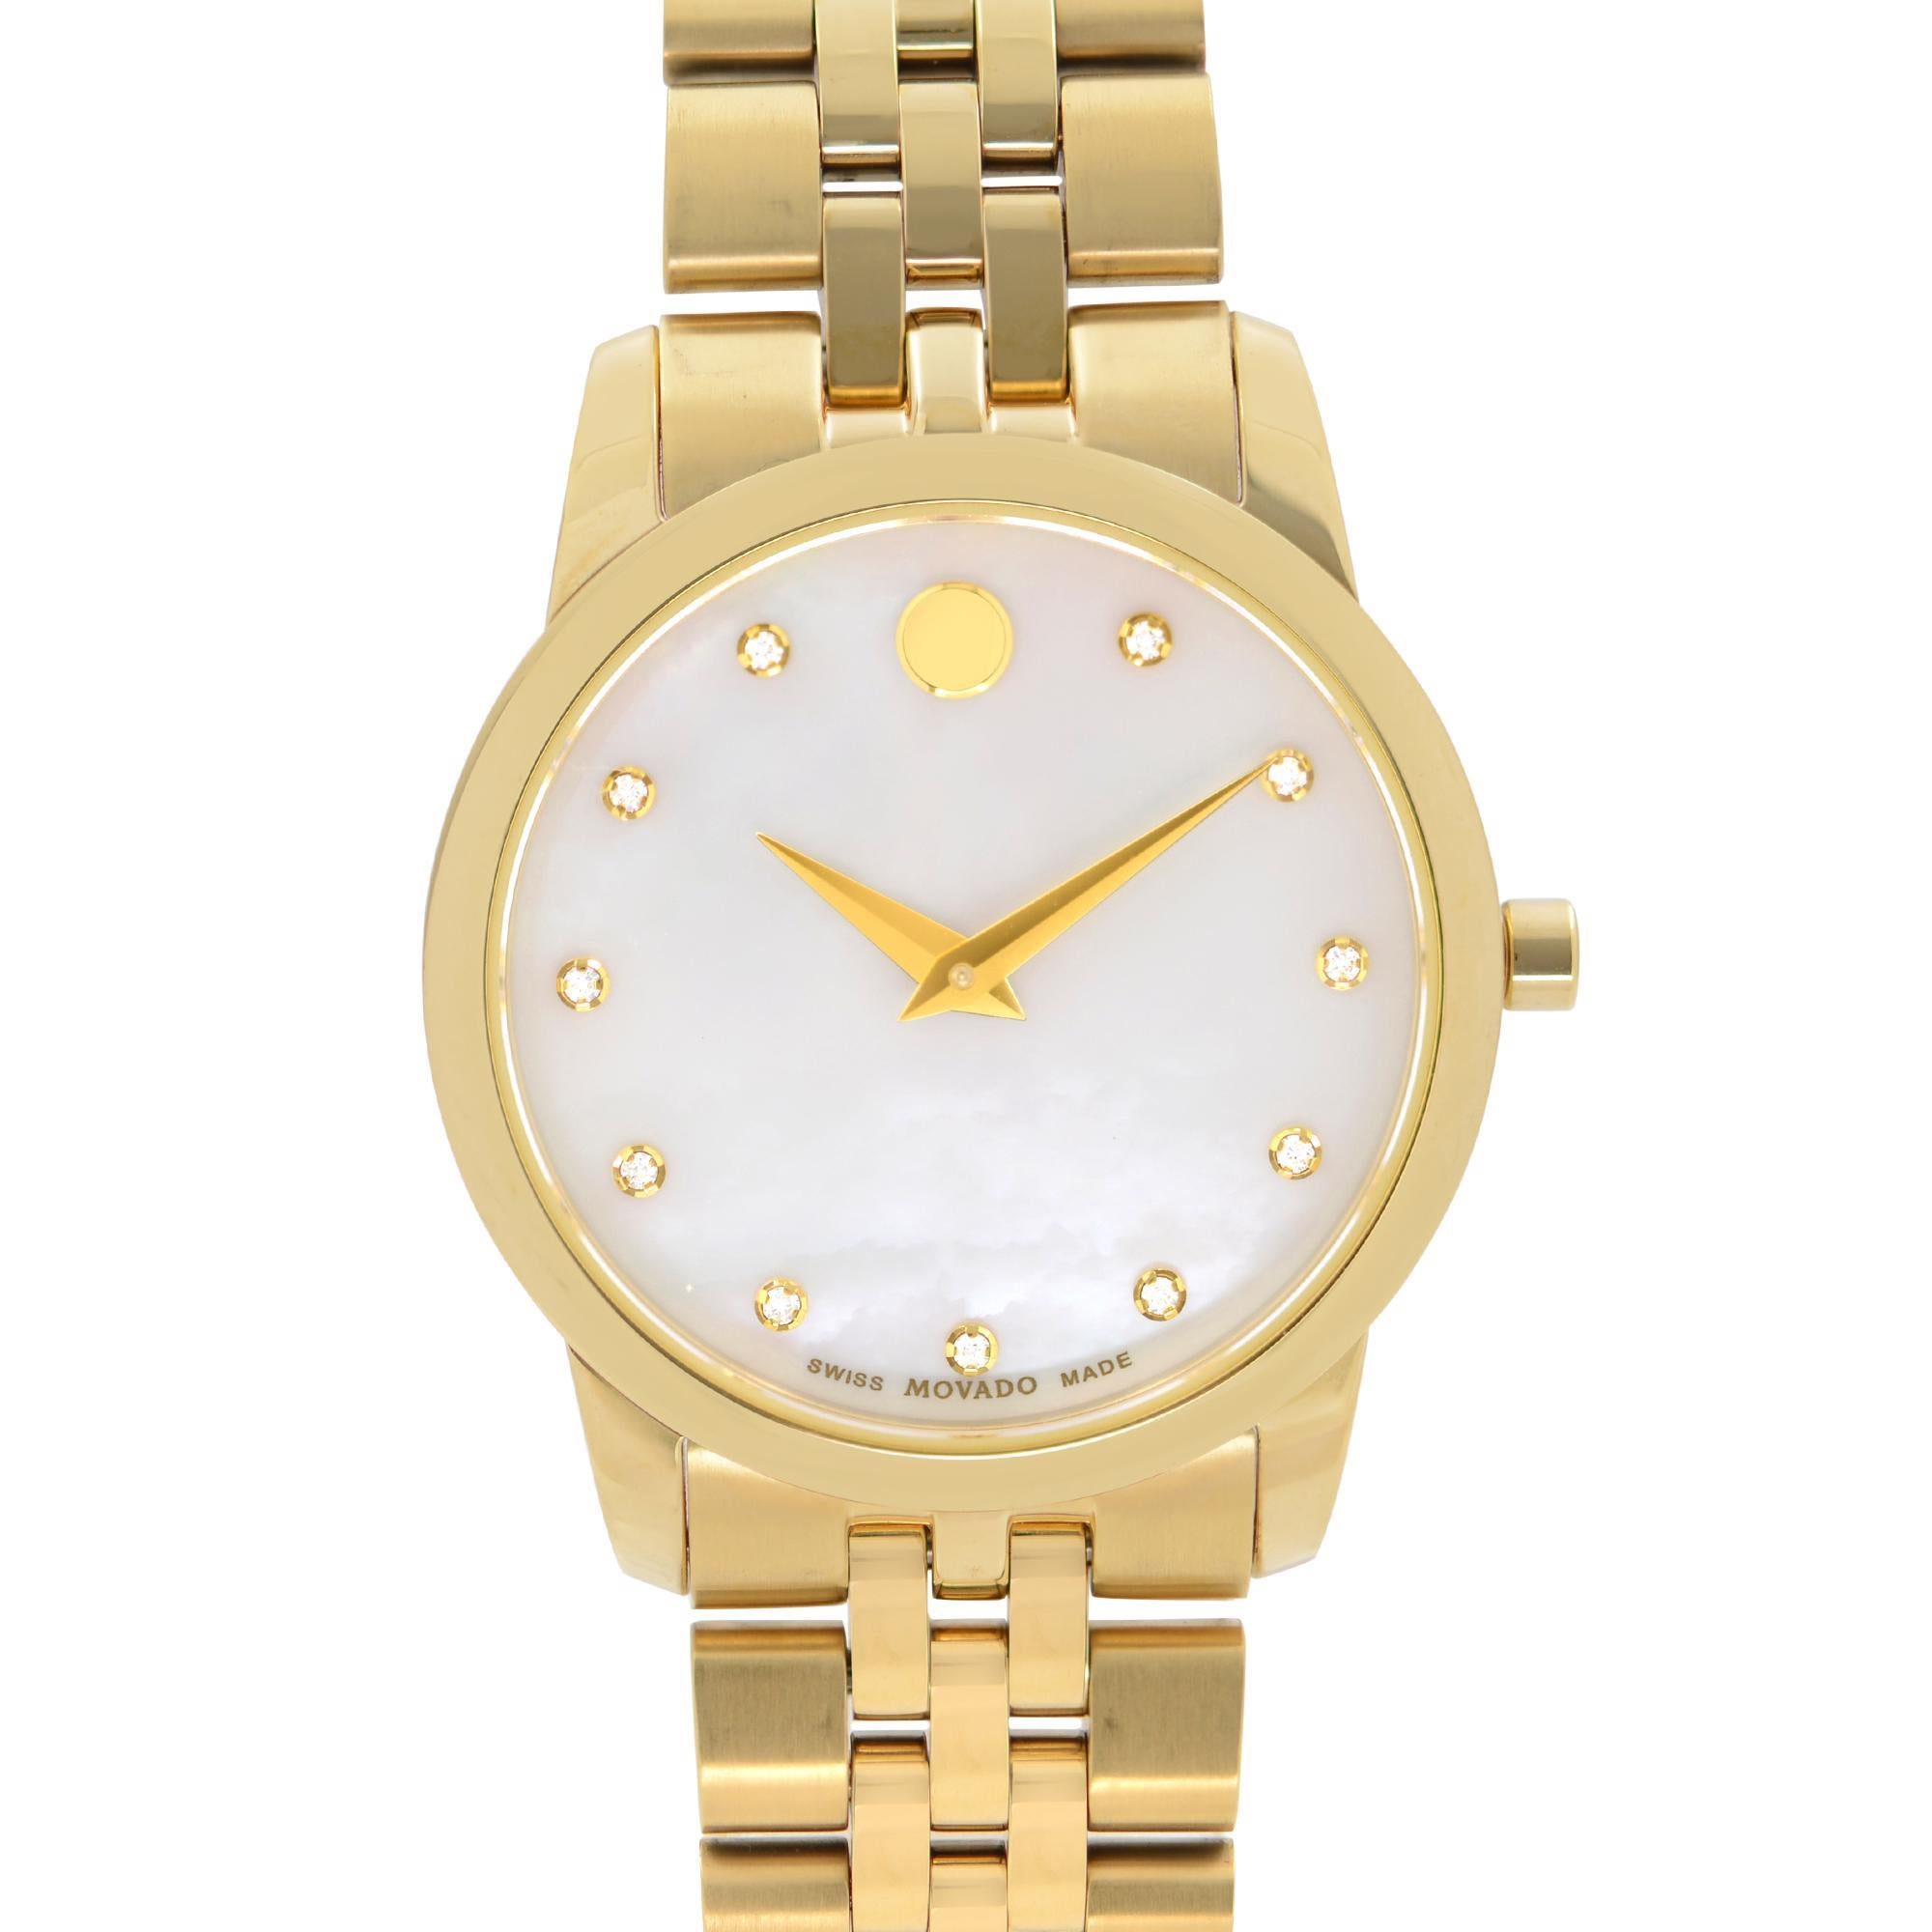 Pre-owned Movado Museum Classic Steel Mother of Pearl Diamond Dial Ladies Watch 0606998. Timepiece Has Tiny Scratches. Original Box and Chronostore Authenticity Card are Included. Covered by 1-year Chronostore Warranty.
Brand Movado
Type